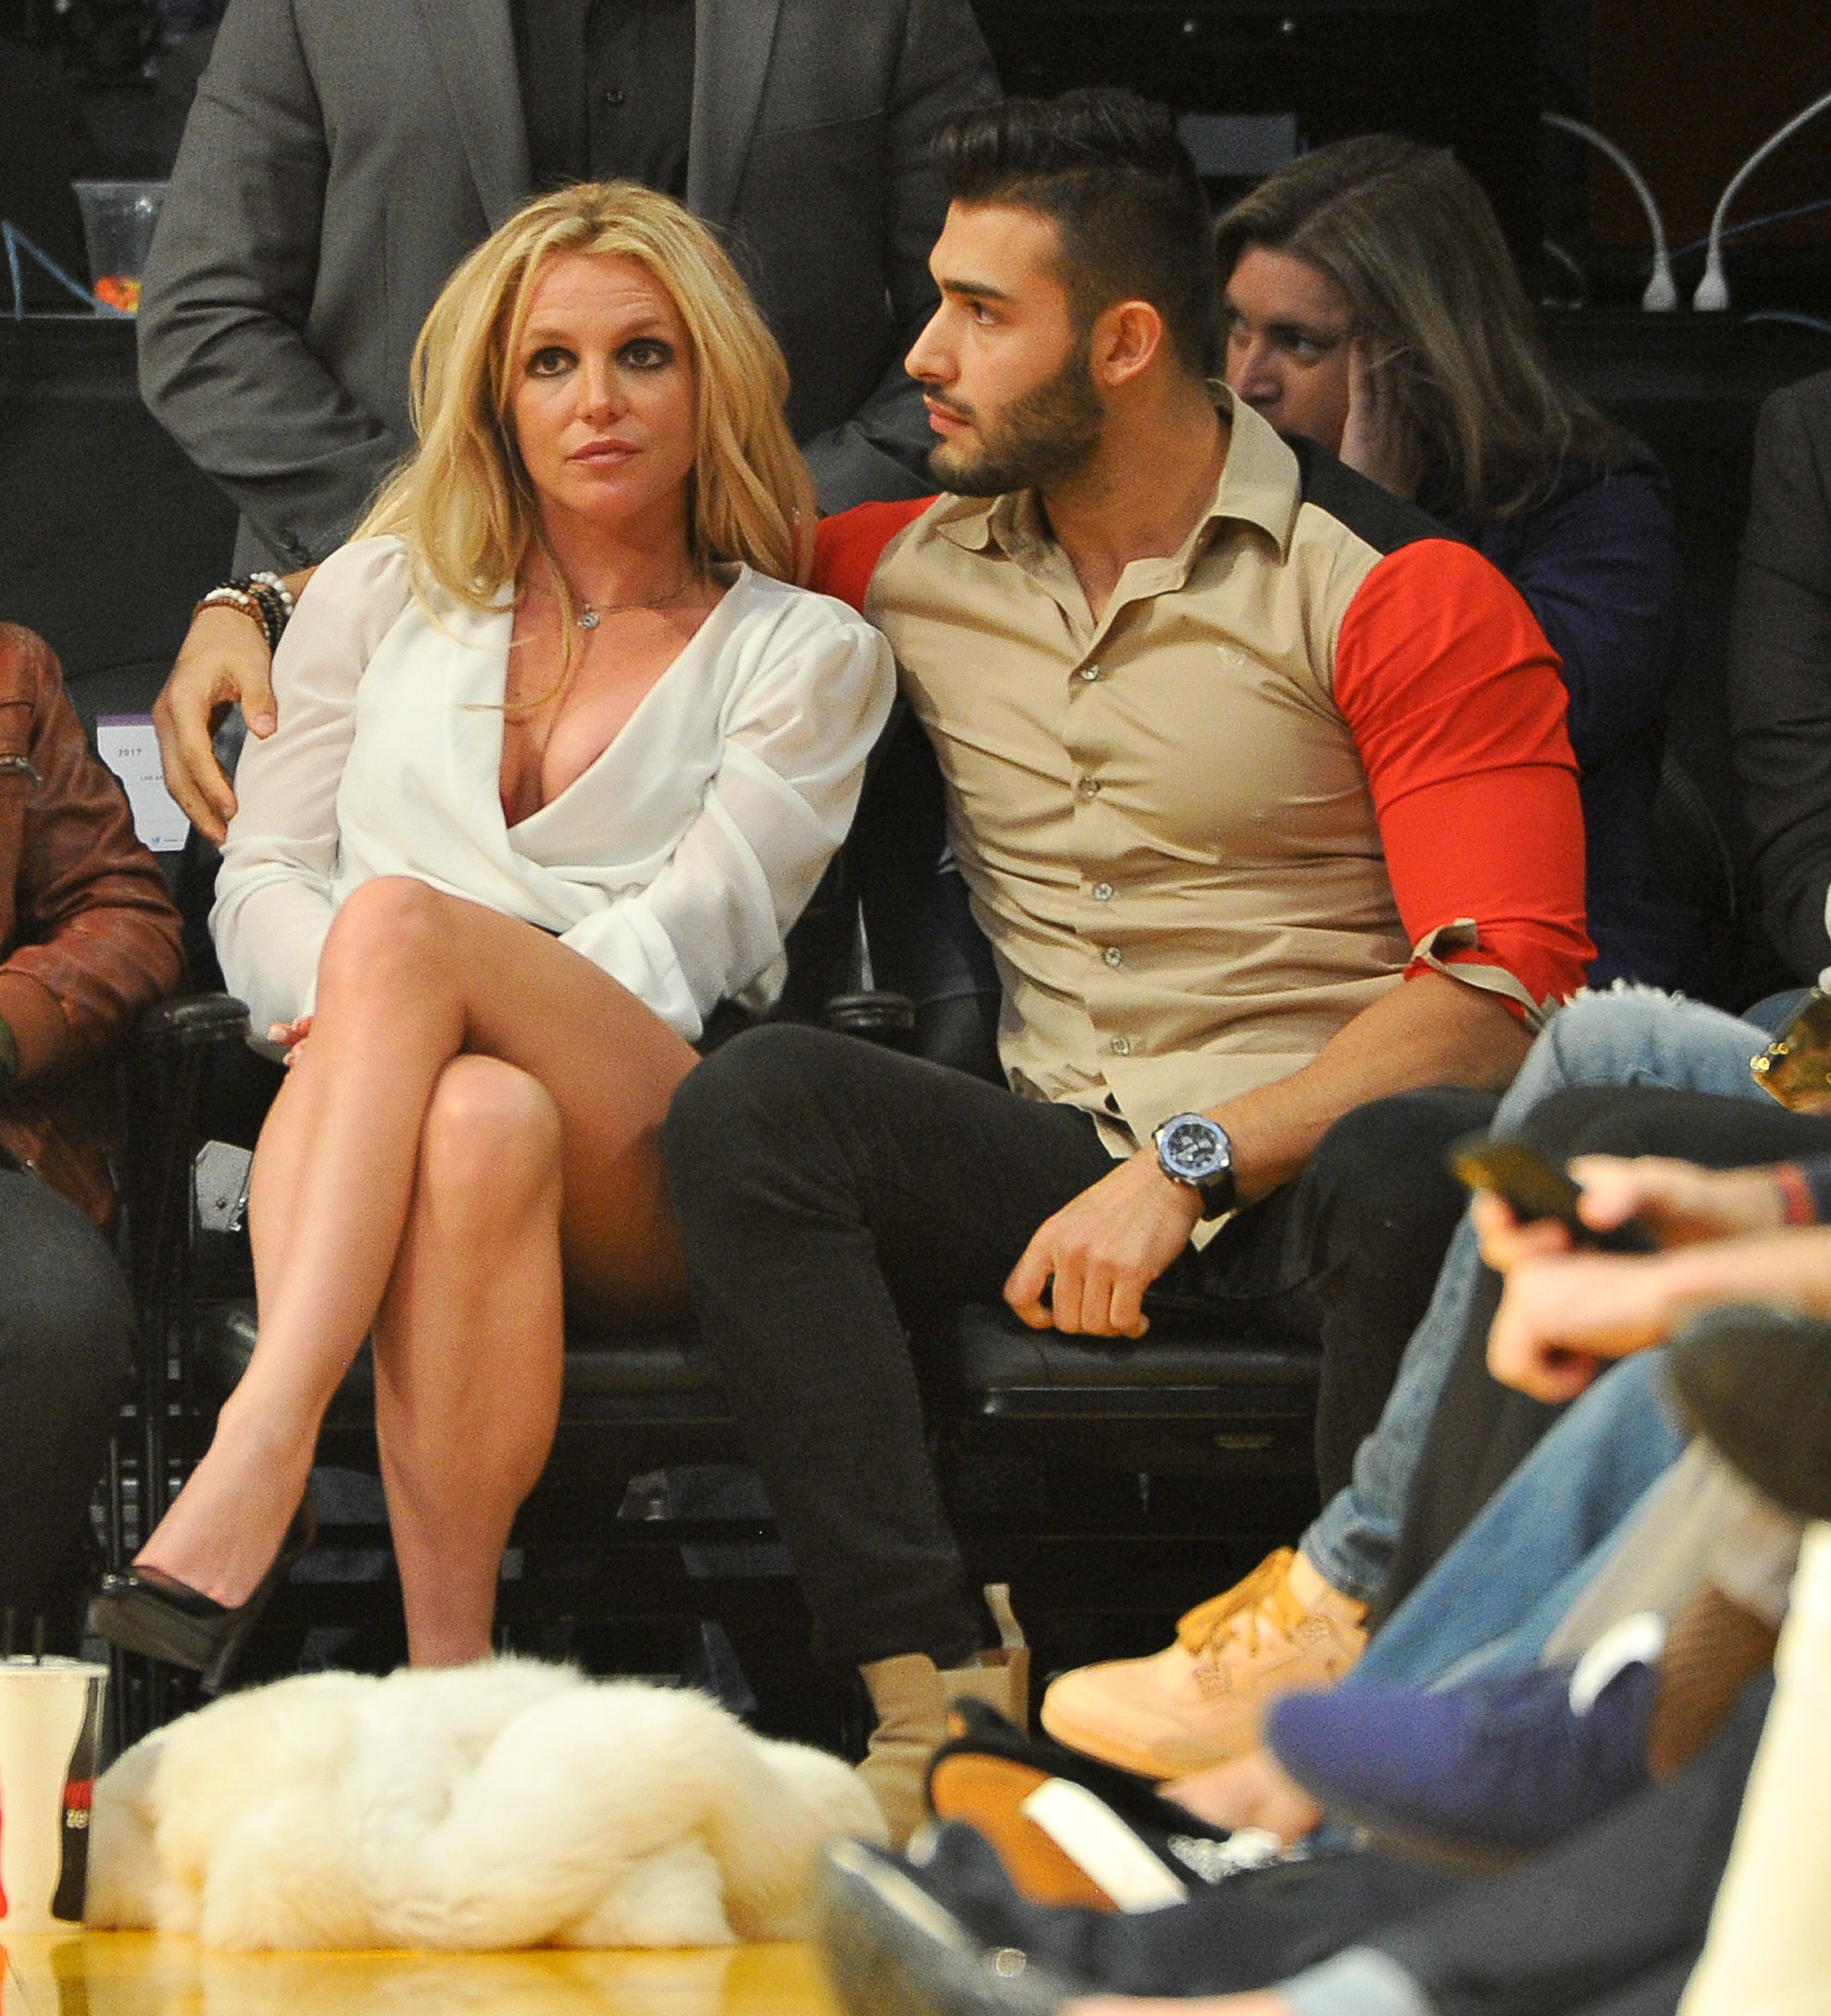 Closeup of Britney Spears and Sam Asghari sitting court side at a game